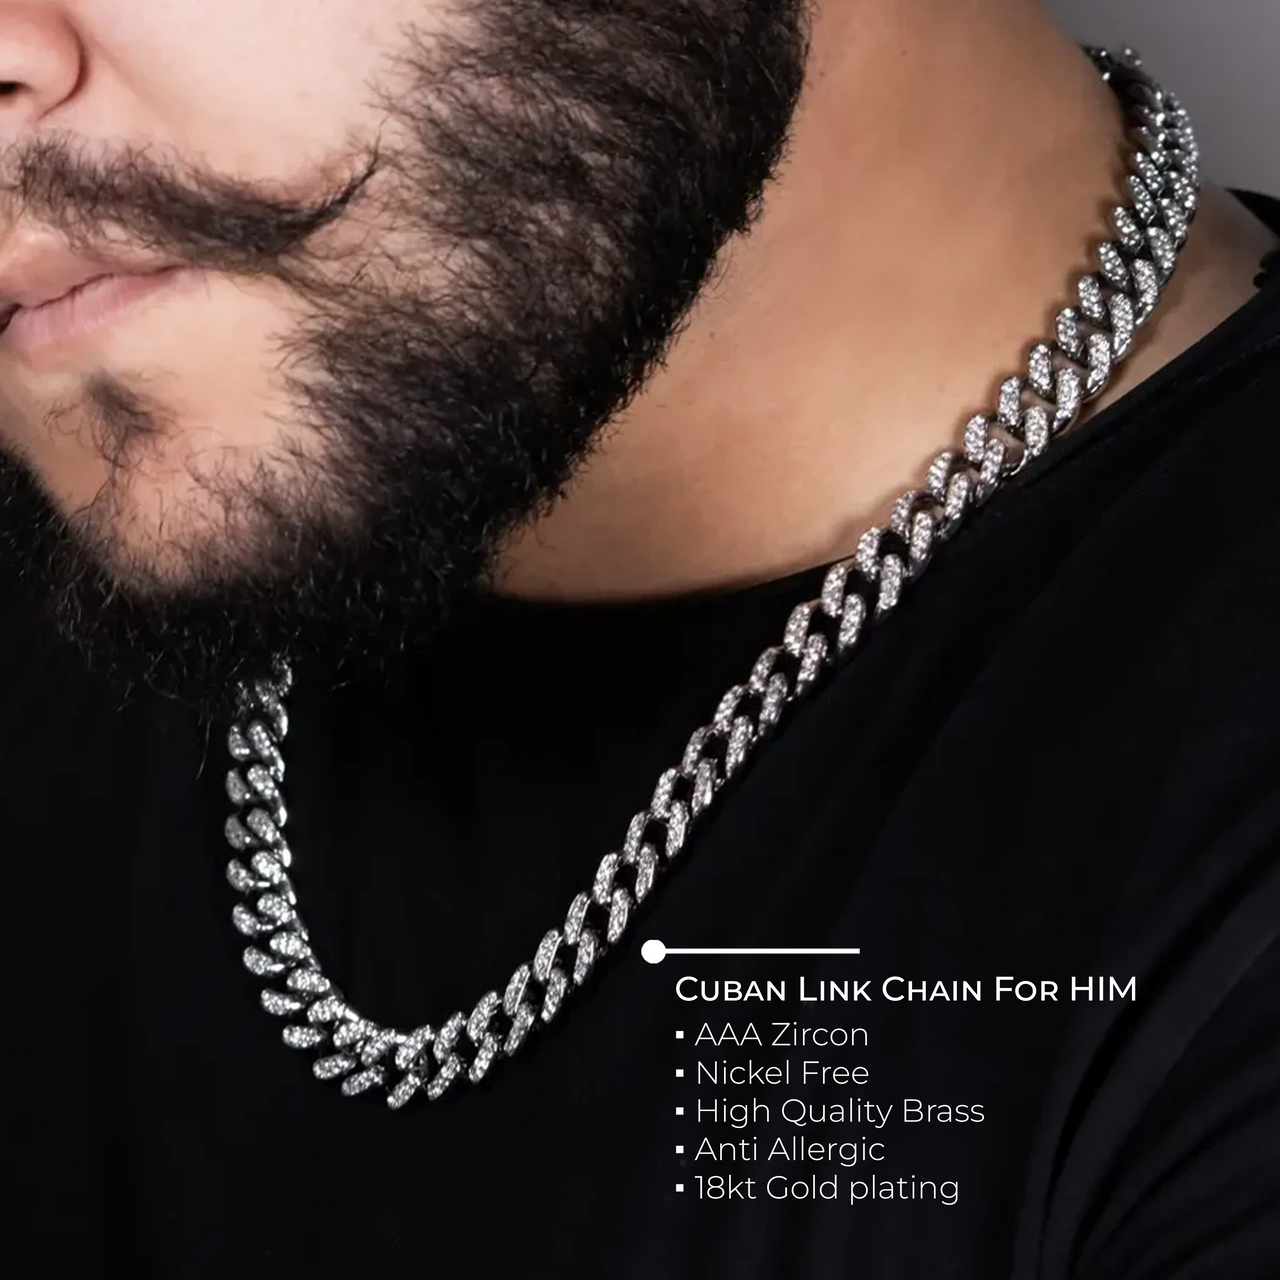 Cuban Link Chain For HIM